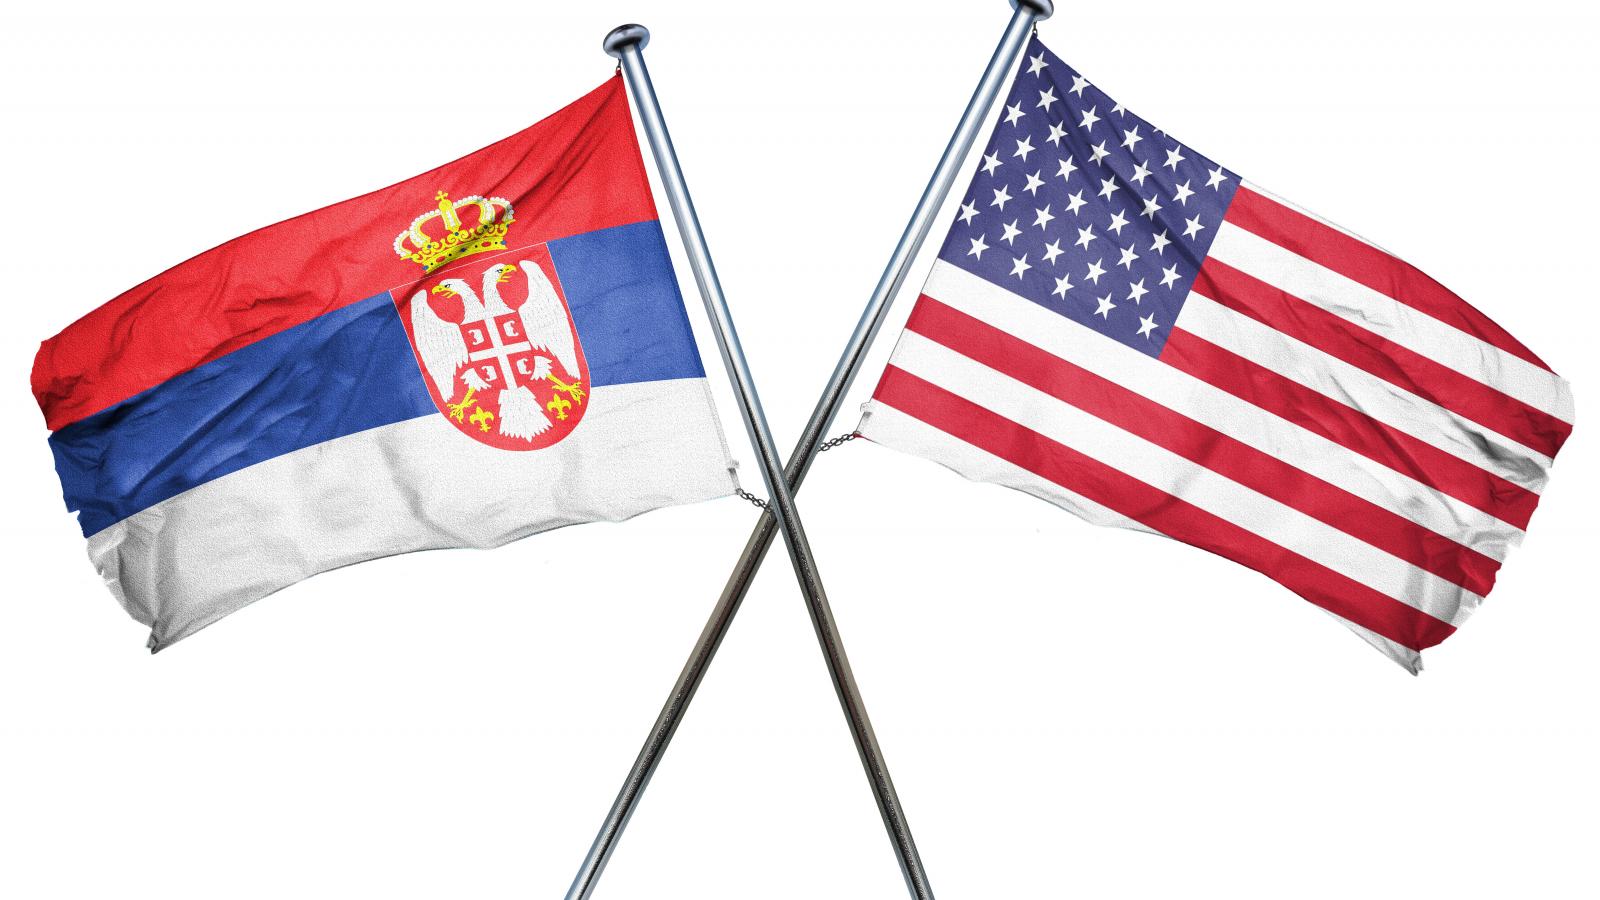 Serbian and U.S. flag crossed over each other